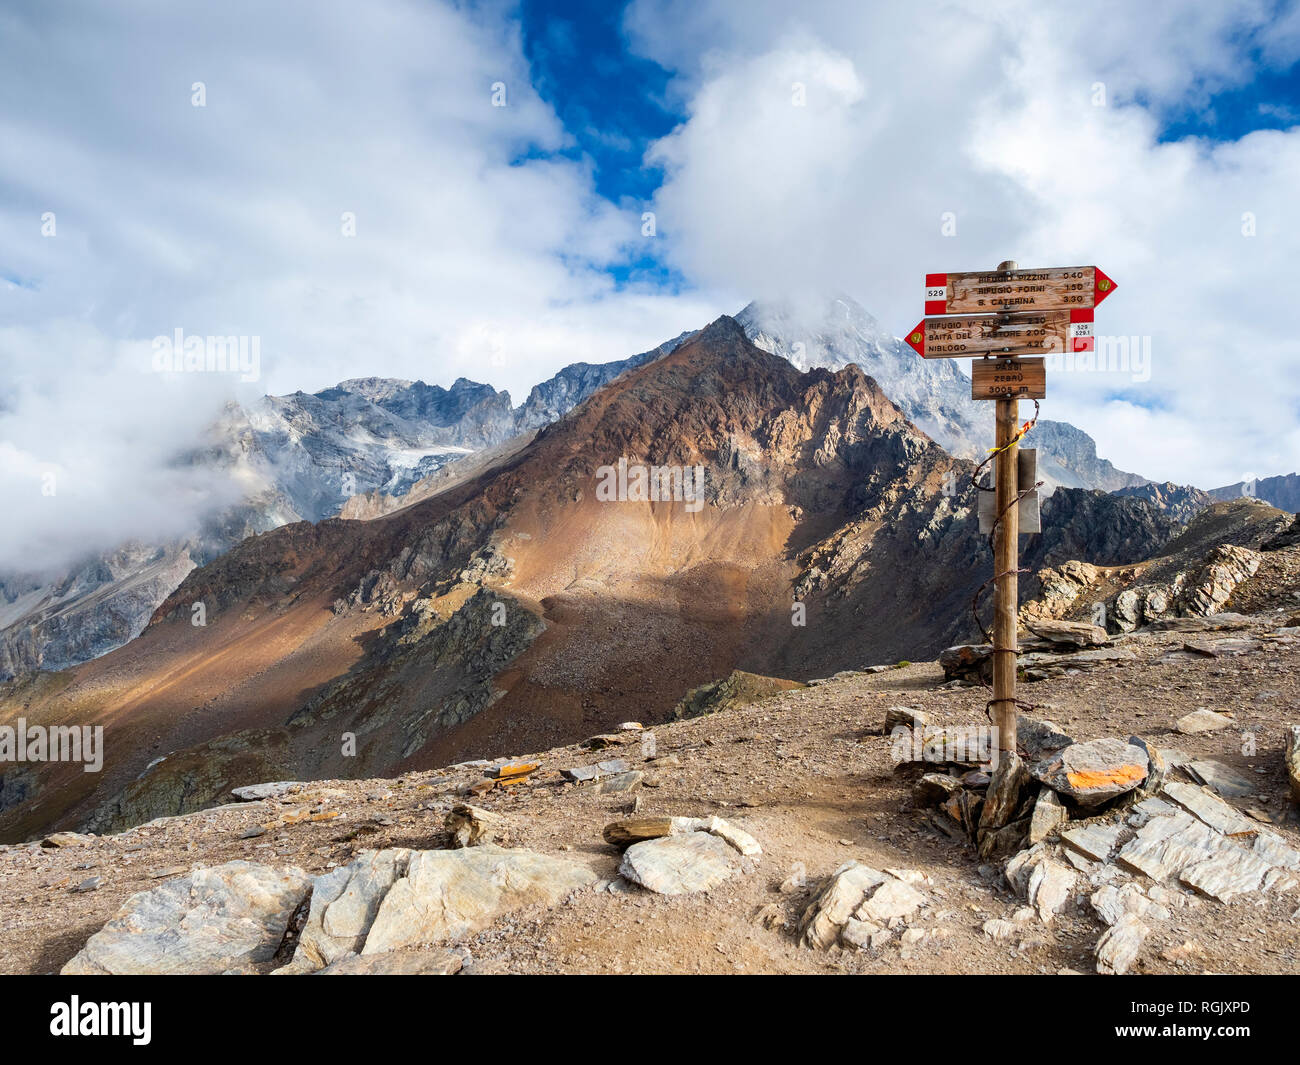 Italy, Ortler Alps, sign post, Gran Zebru in the background Stock Photo